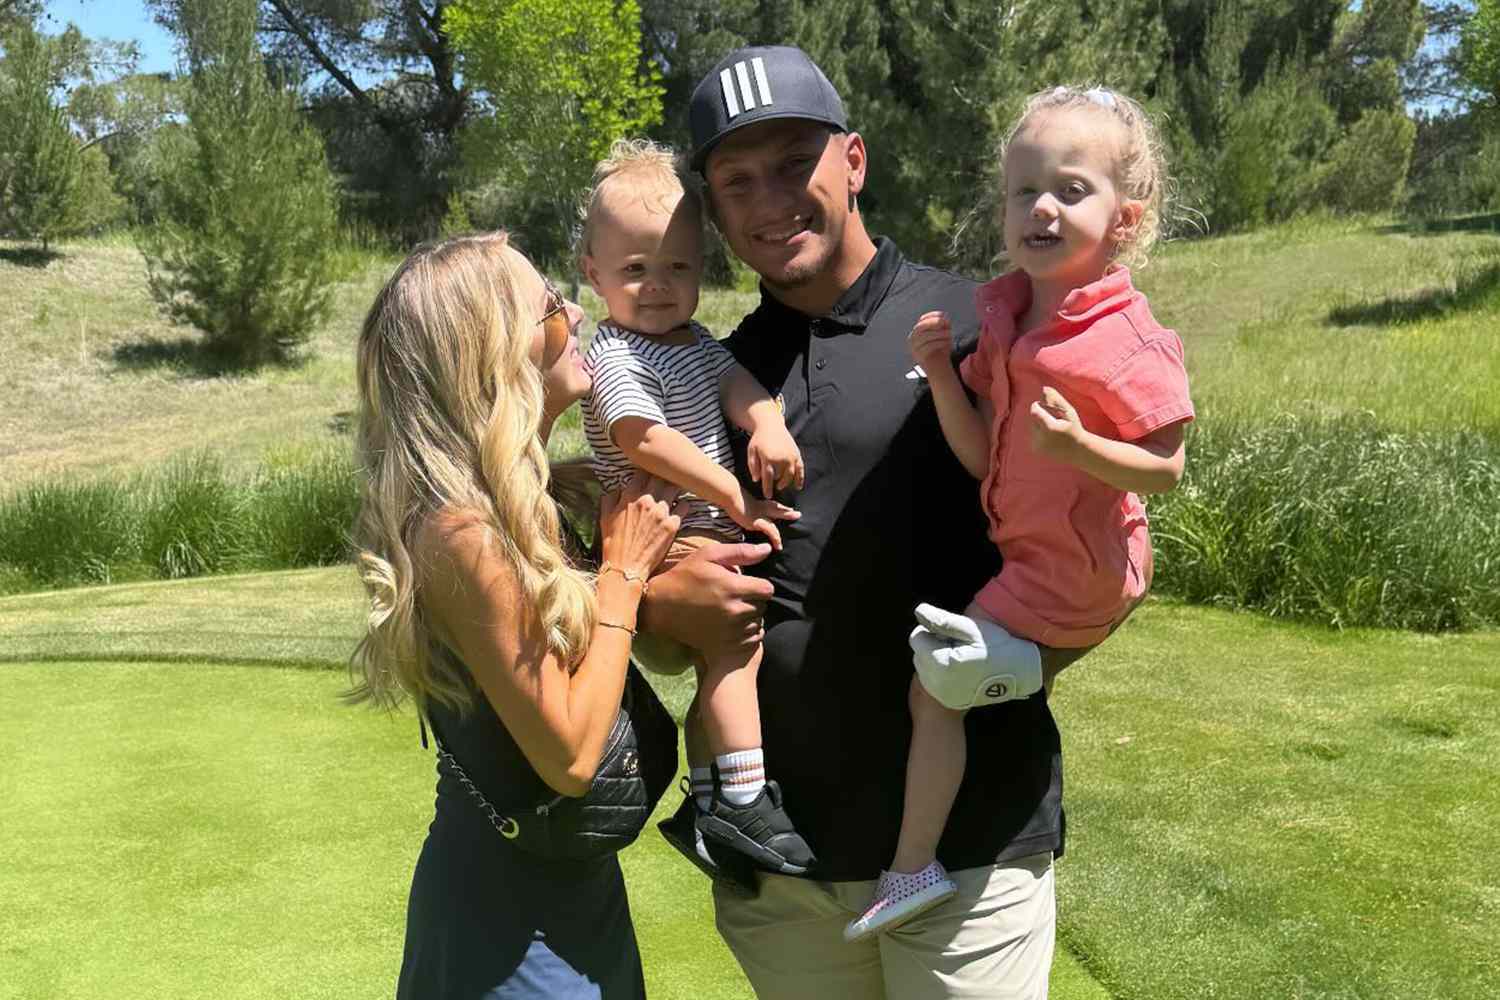 Patrick, Brittany Mahomes Have Fun with Their Kids at Charity Golf Event [Video]